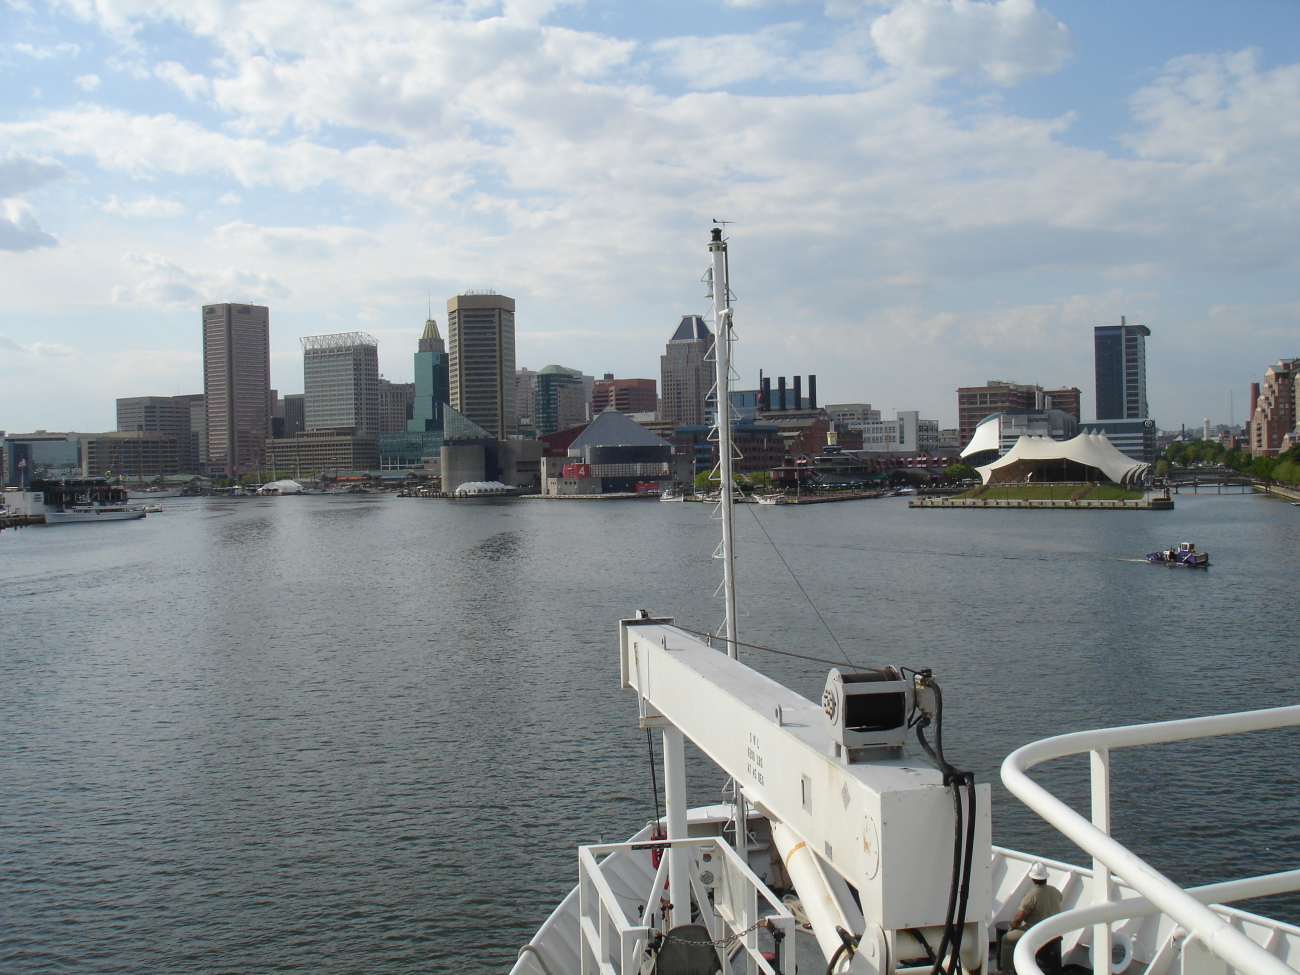 The NOAA Ship THOMAS JEFFERSON approaching the Inner Harbor atBaltimore